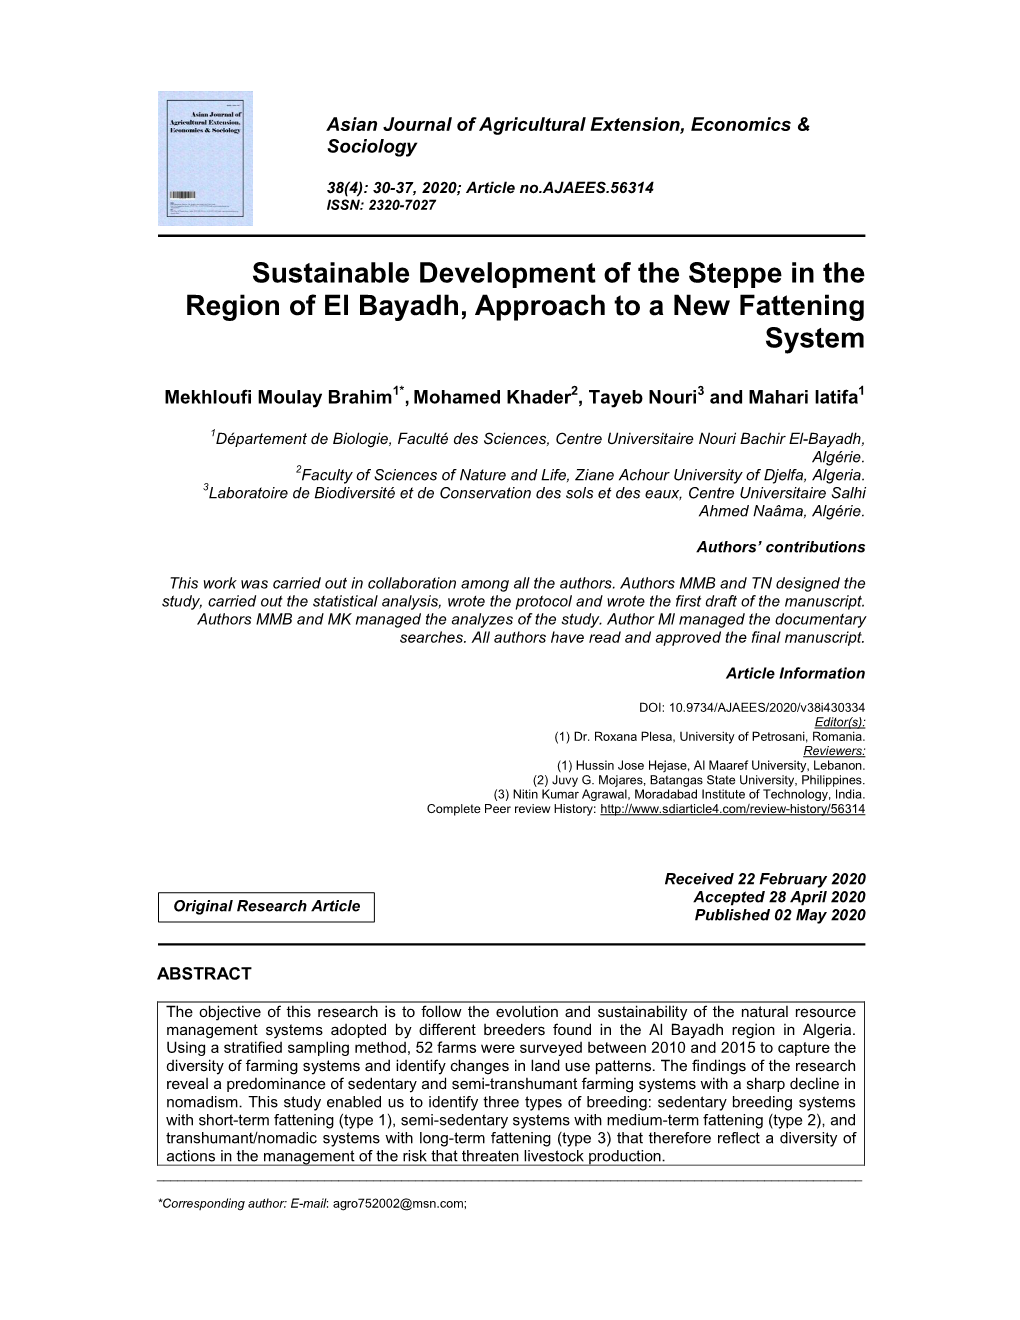 Sustainable Development of the Steppe in the Region of El Bayadh, Approach to a New Fattening System